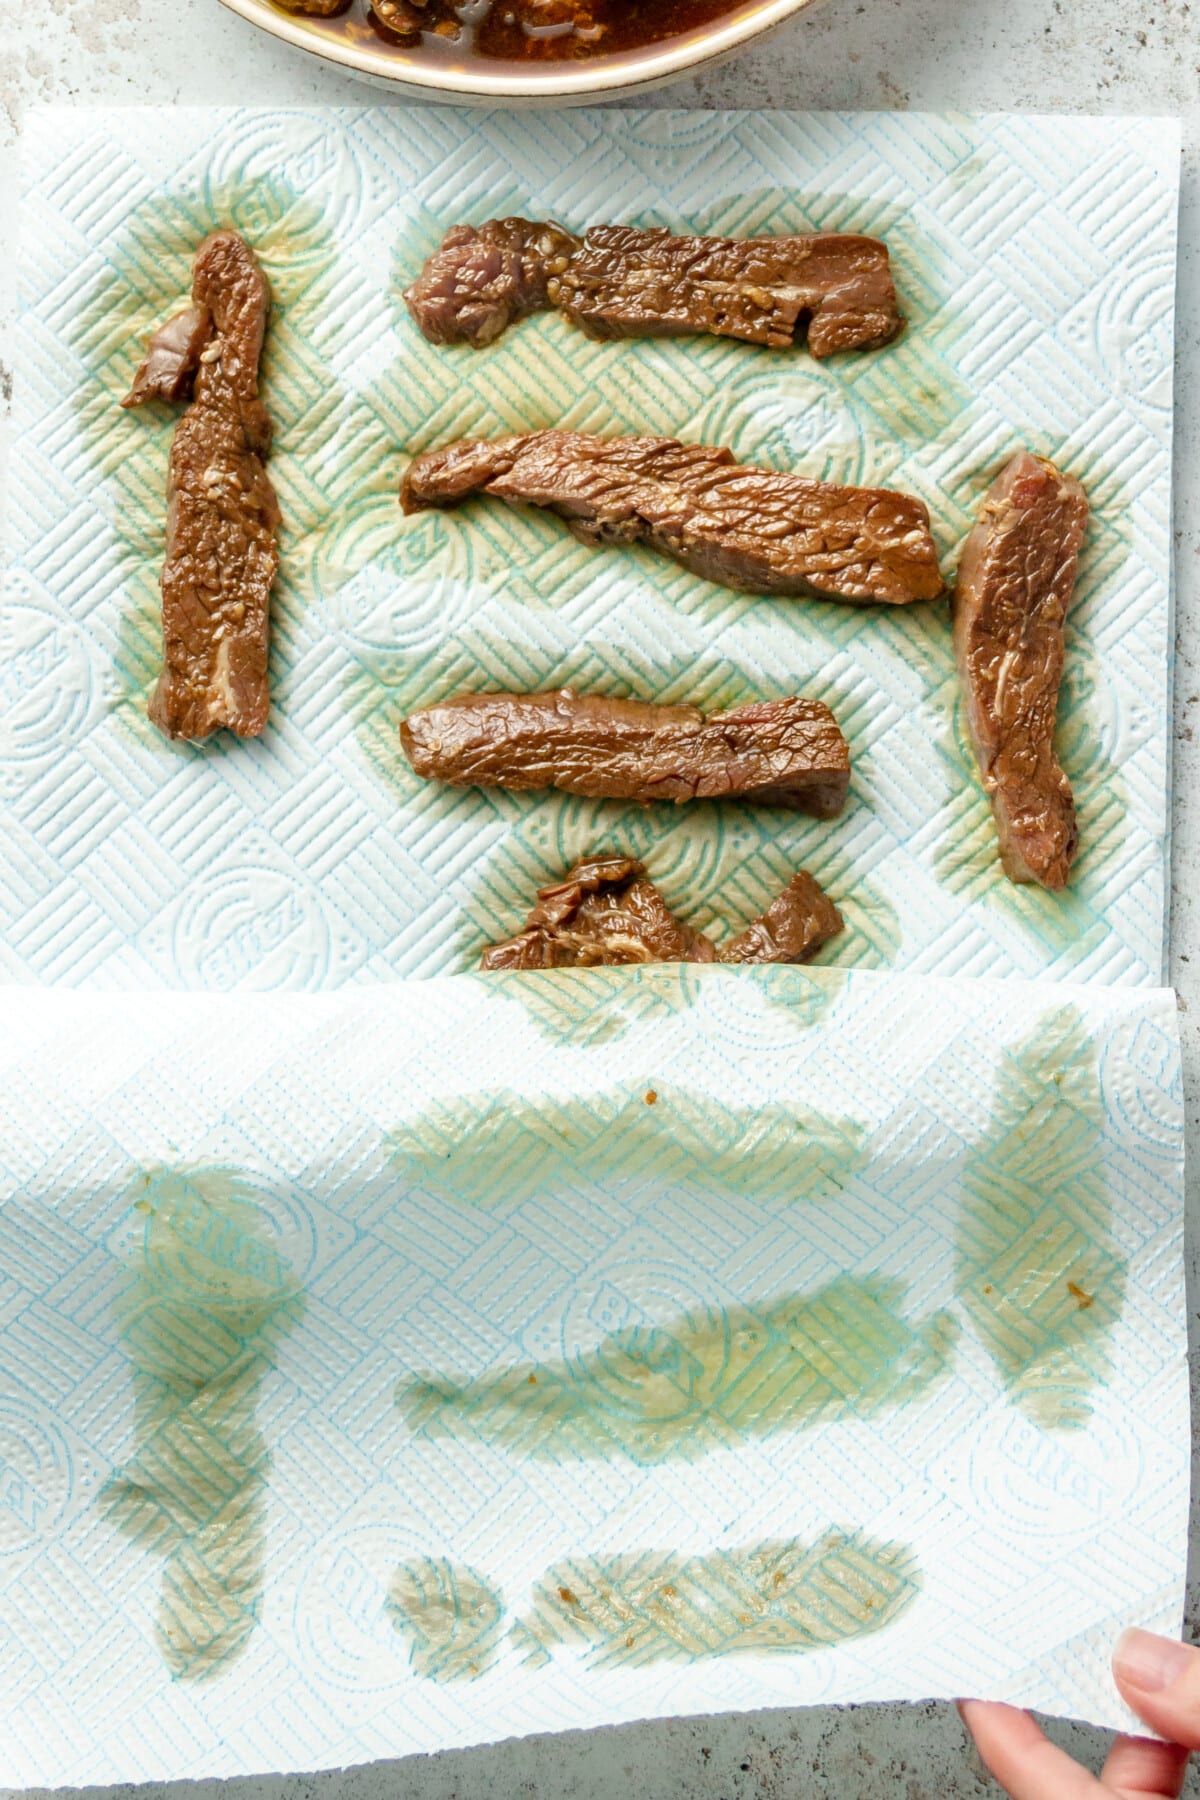 Marinated beef strips are dried in paper towels on a light grey surface.